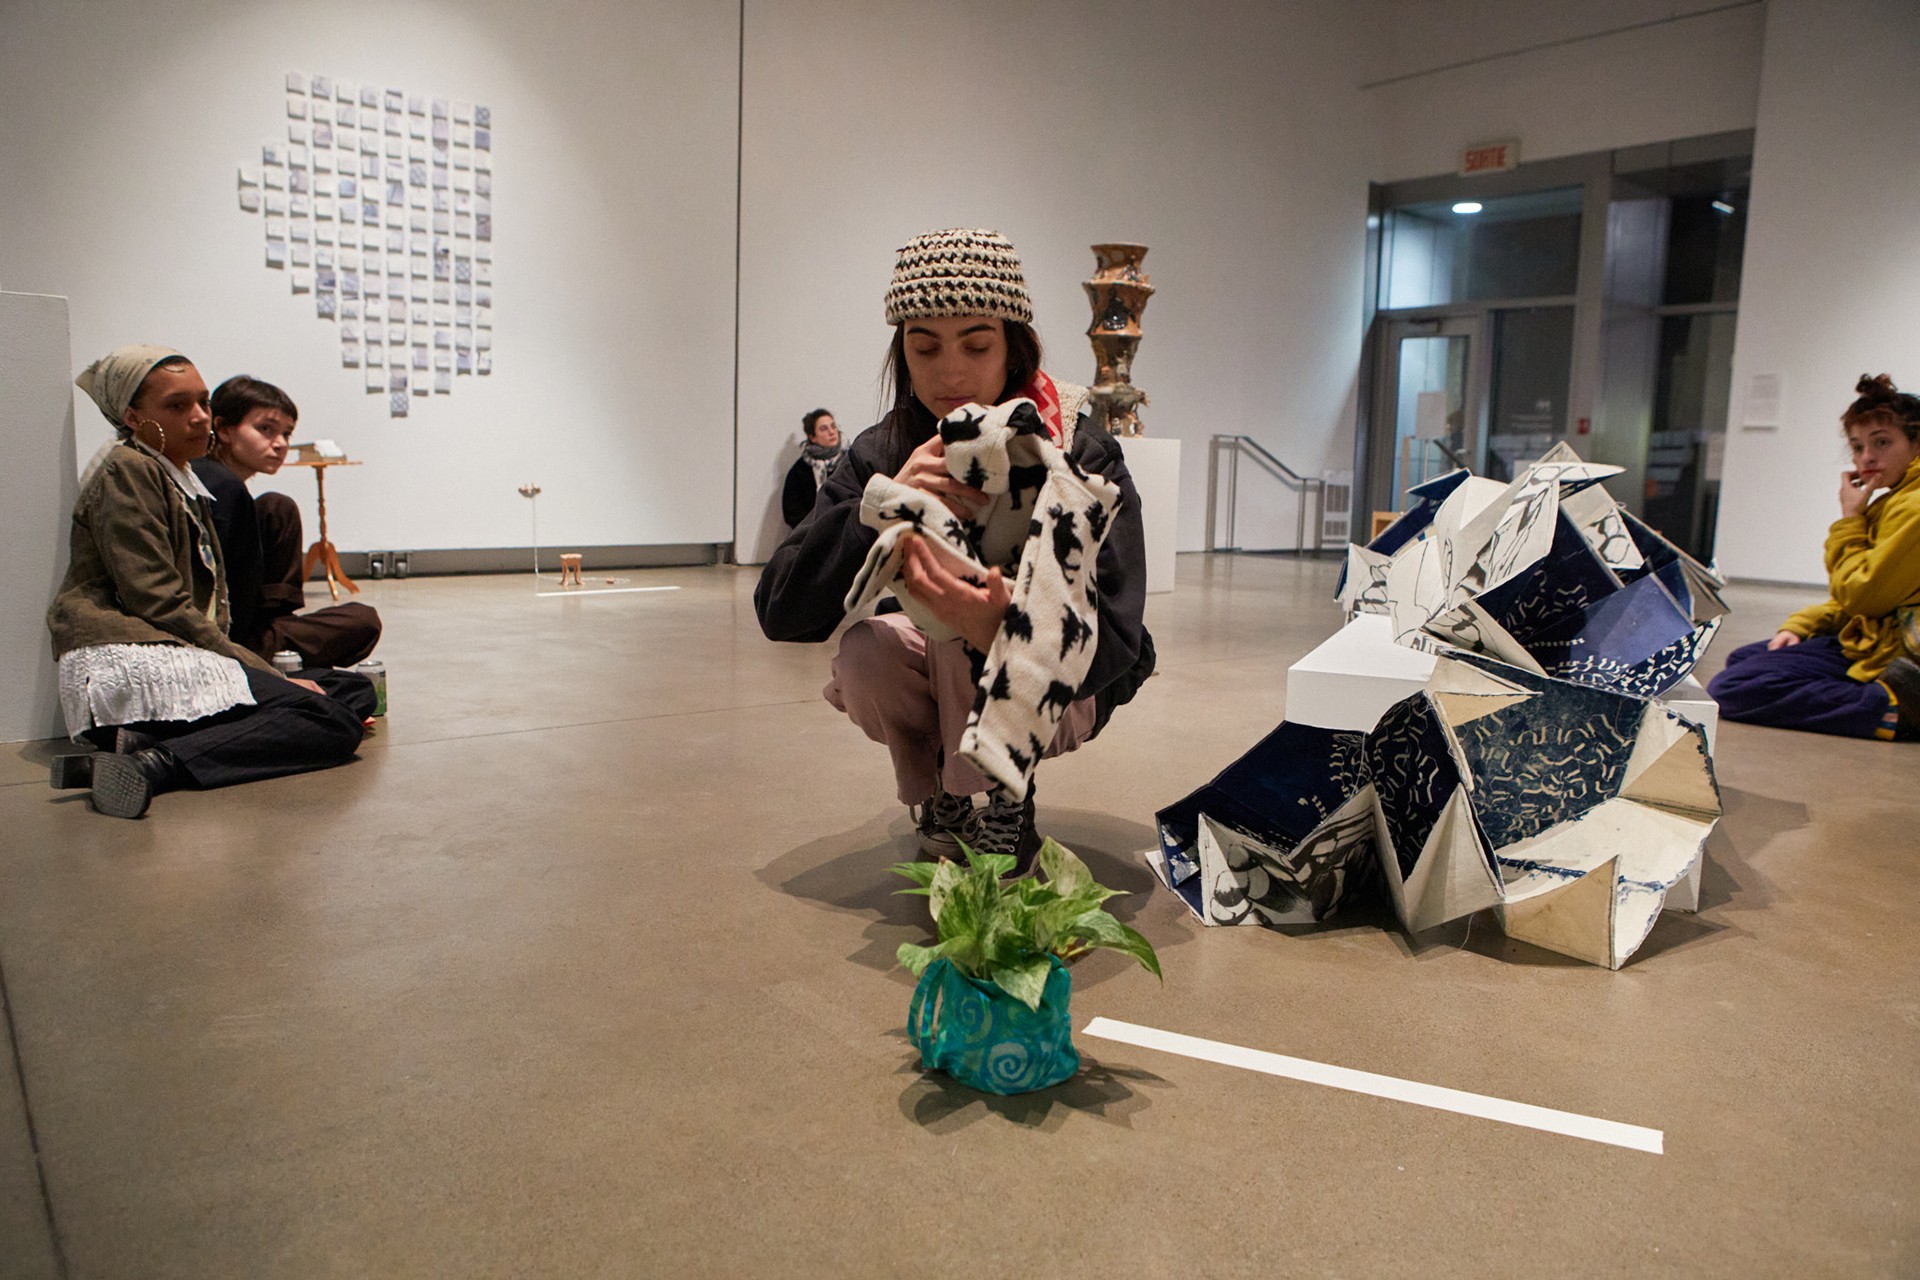 Laura, the performer is captured squatting in the middle of the gallery while holding different objects given by friends, in this scene we see most predominantly a black and white sweater and a house plant. 